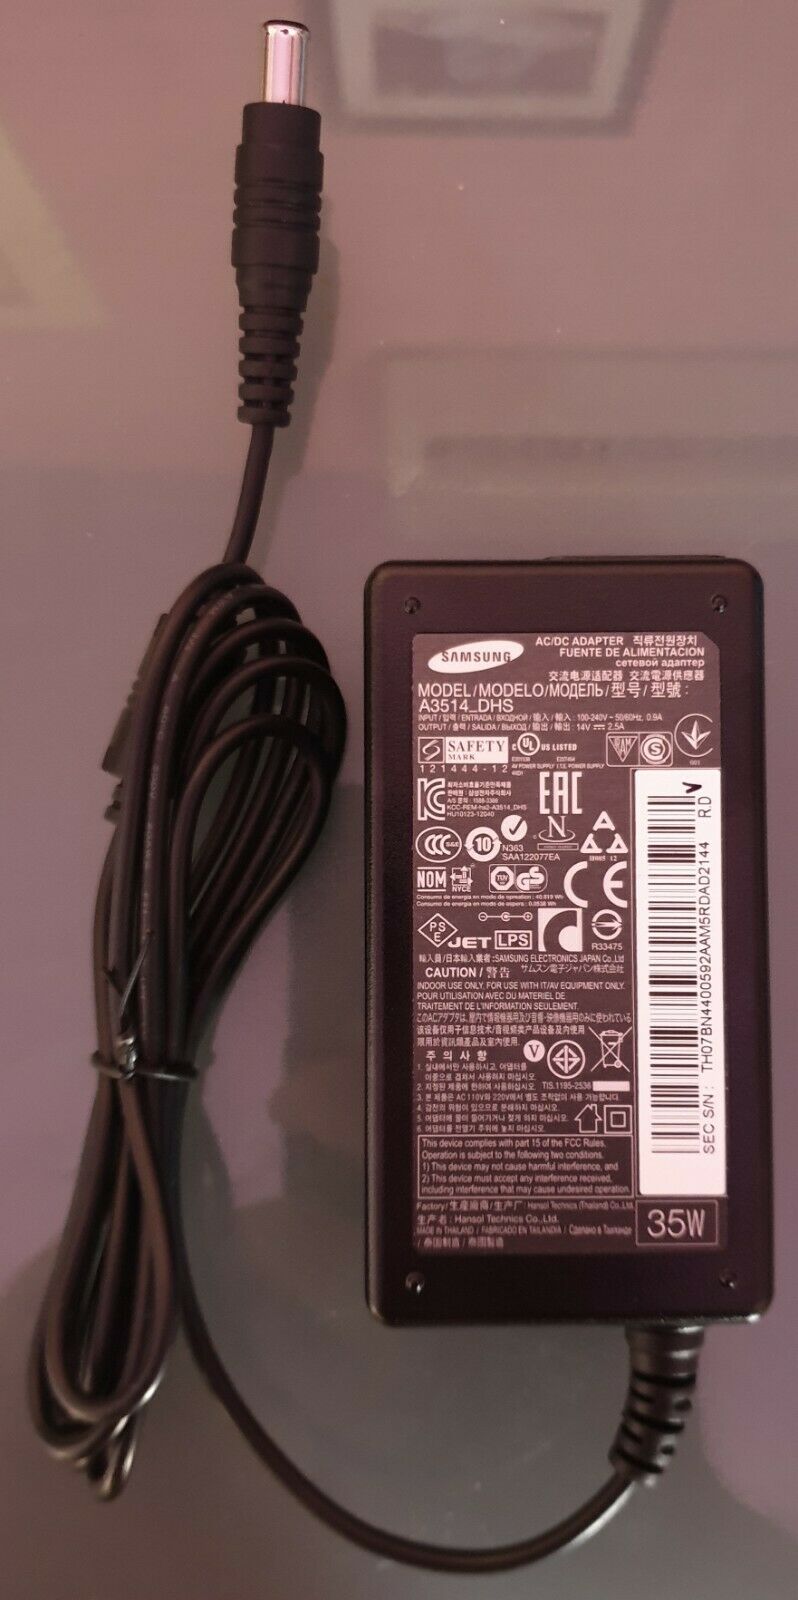 Samsung T22E390EW LED-LCD TV 14V 2.5A AC-DC Adaptor Power Supply EAN: Does not apply Type: AC & DC Output Voltage: 2